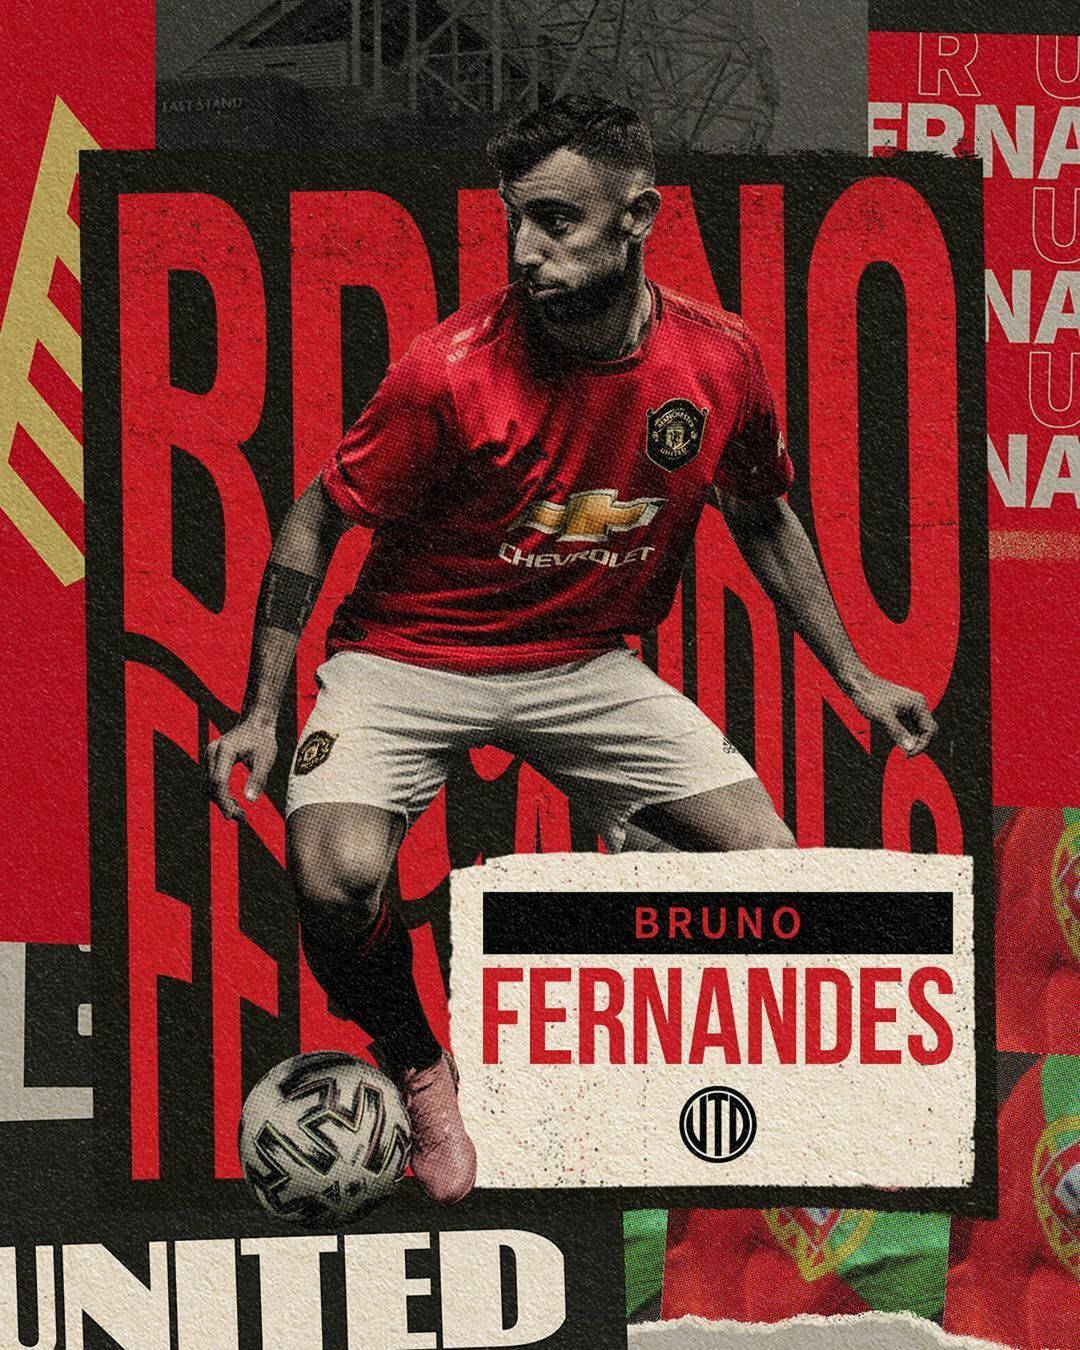 Top 999+ Bruno Fernandes Manchester United Wallpaper Full HD, 4K✅Free to Use